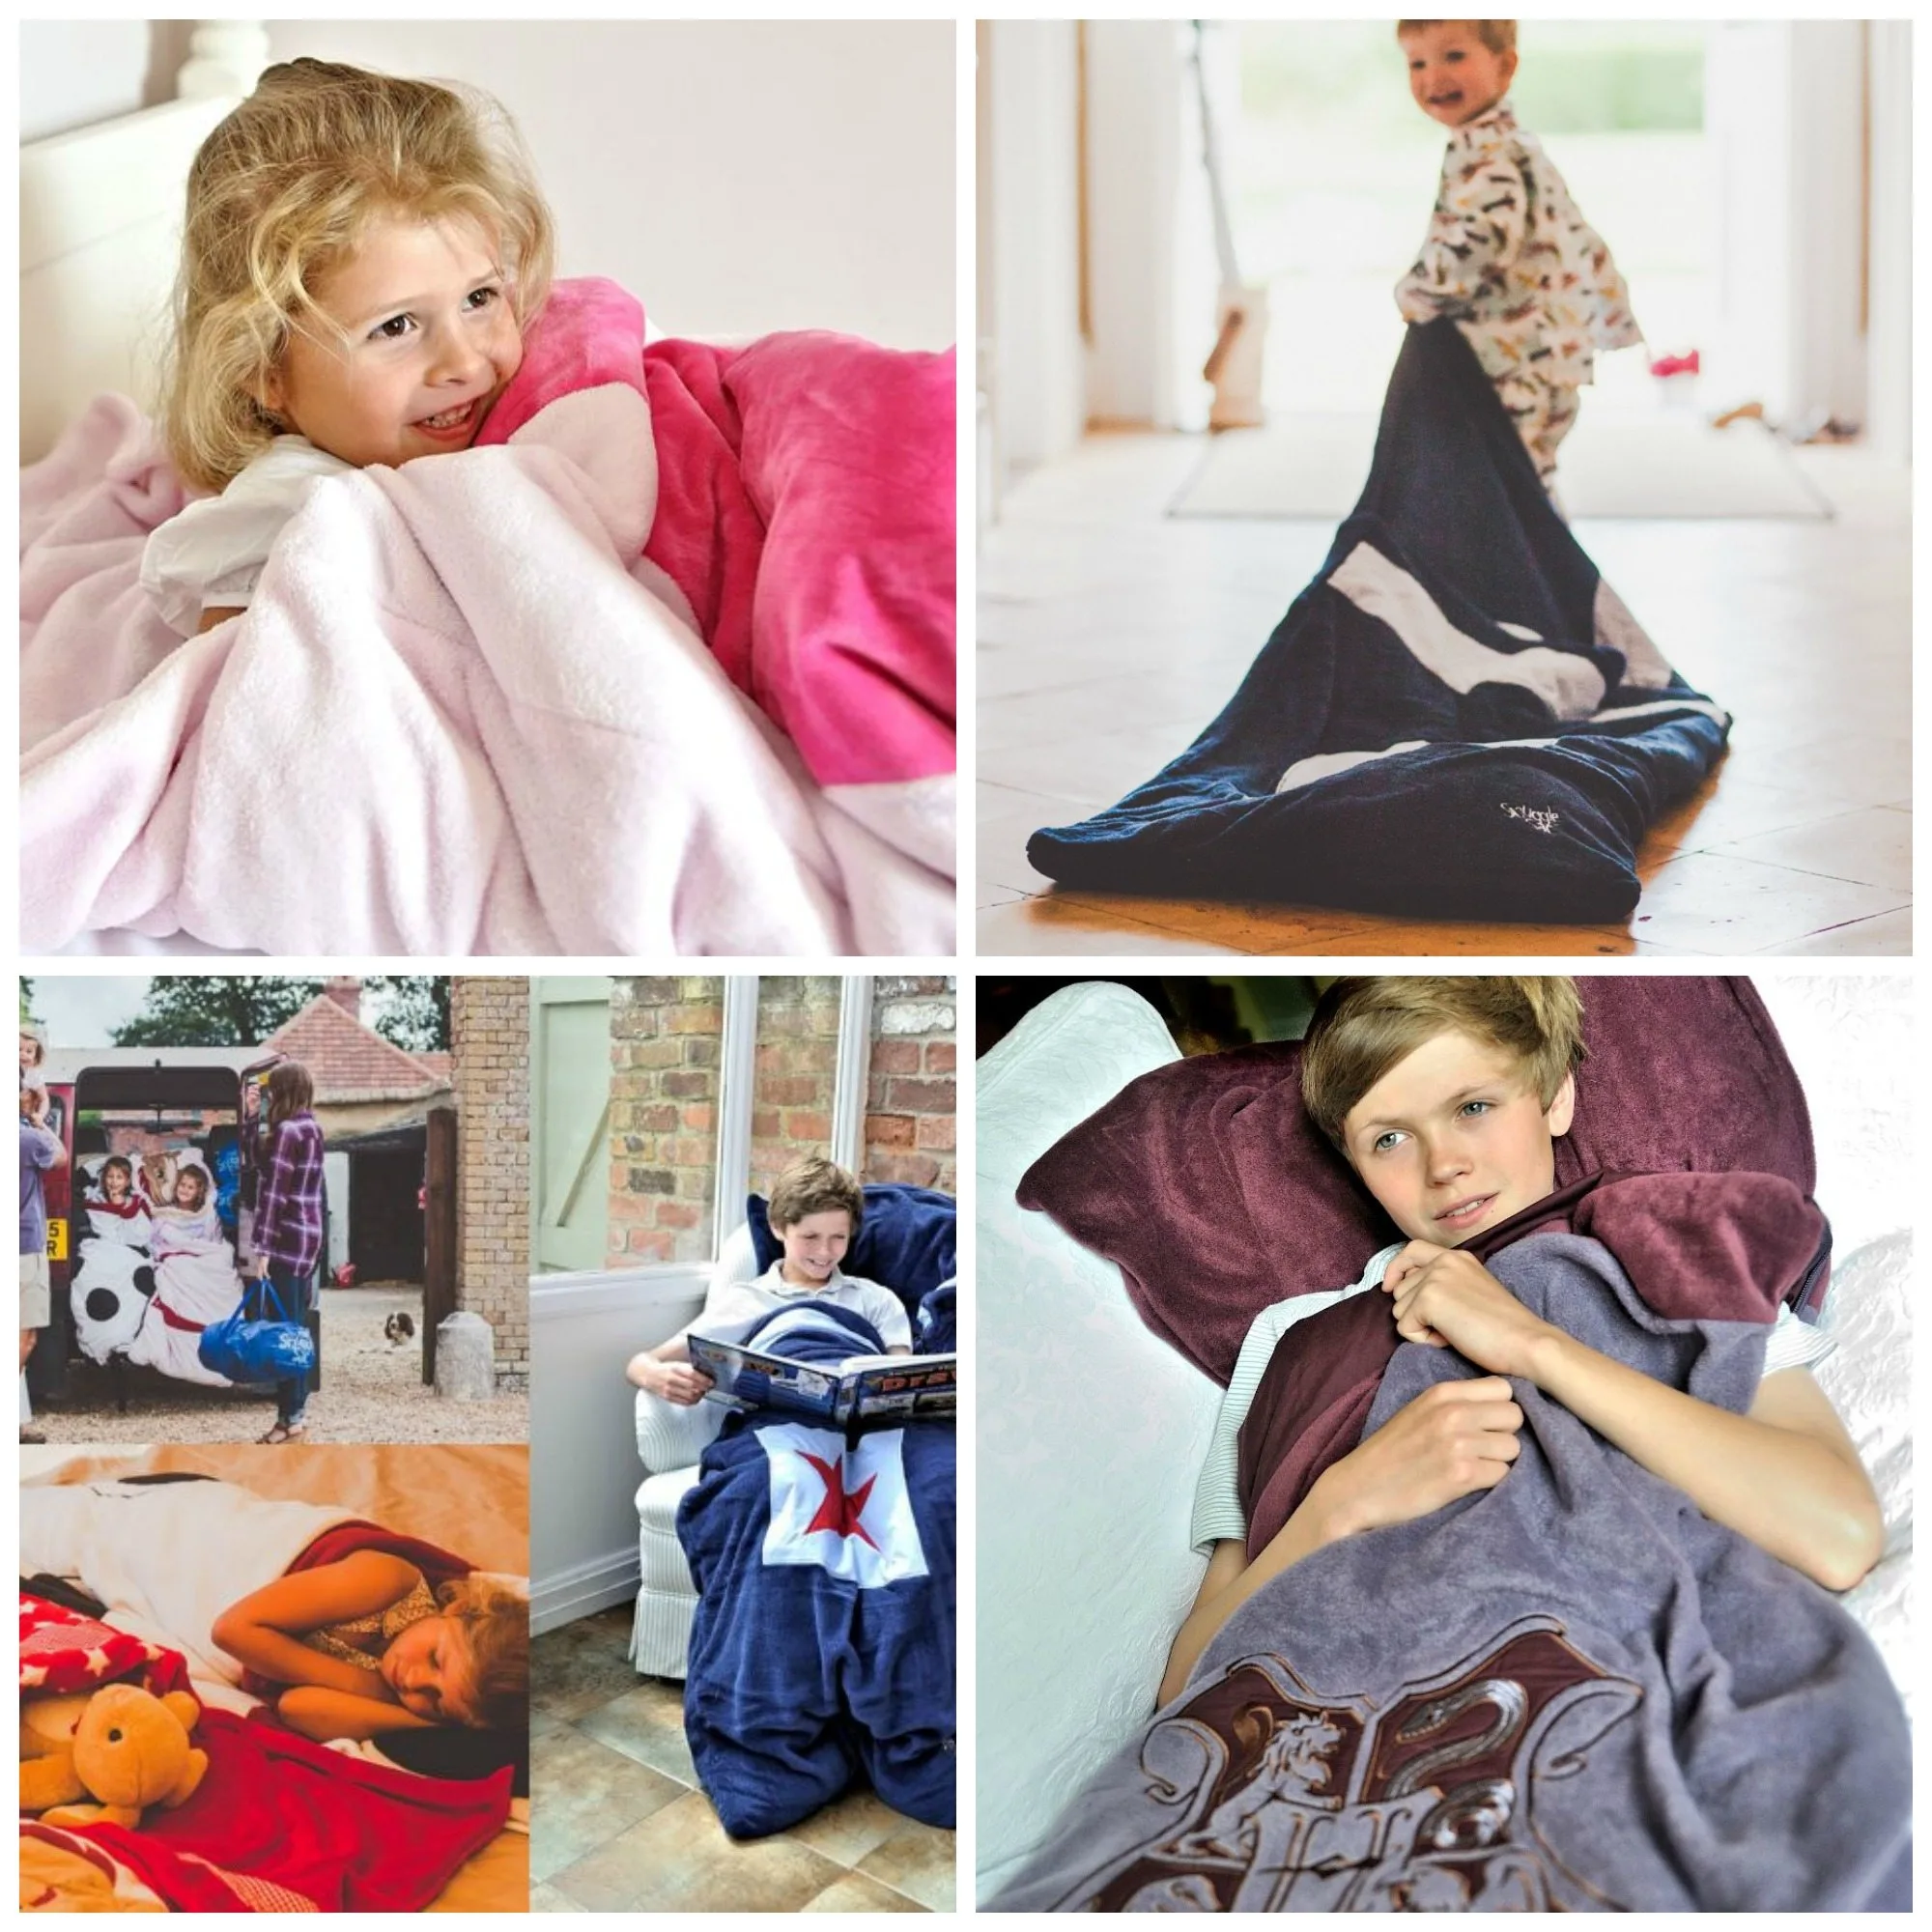 Which Snuggle Sac will you choose in our KiddyPlay giveaway?